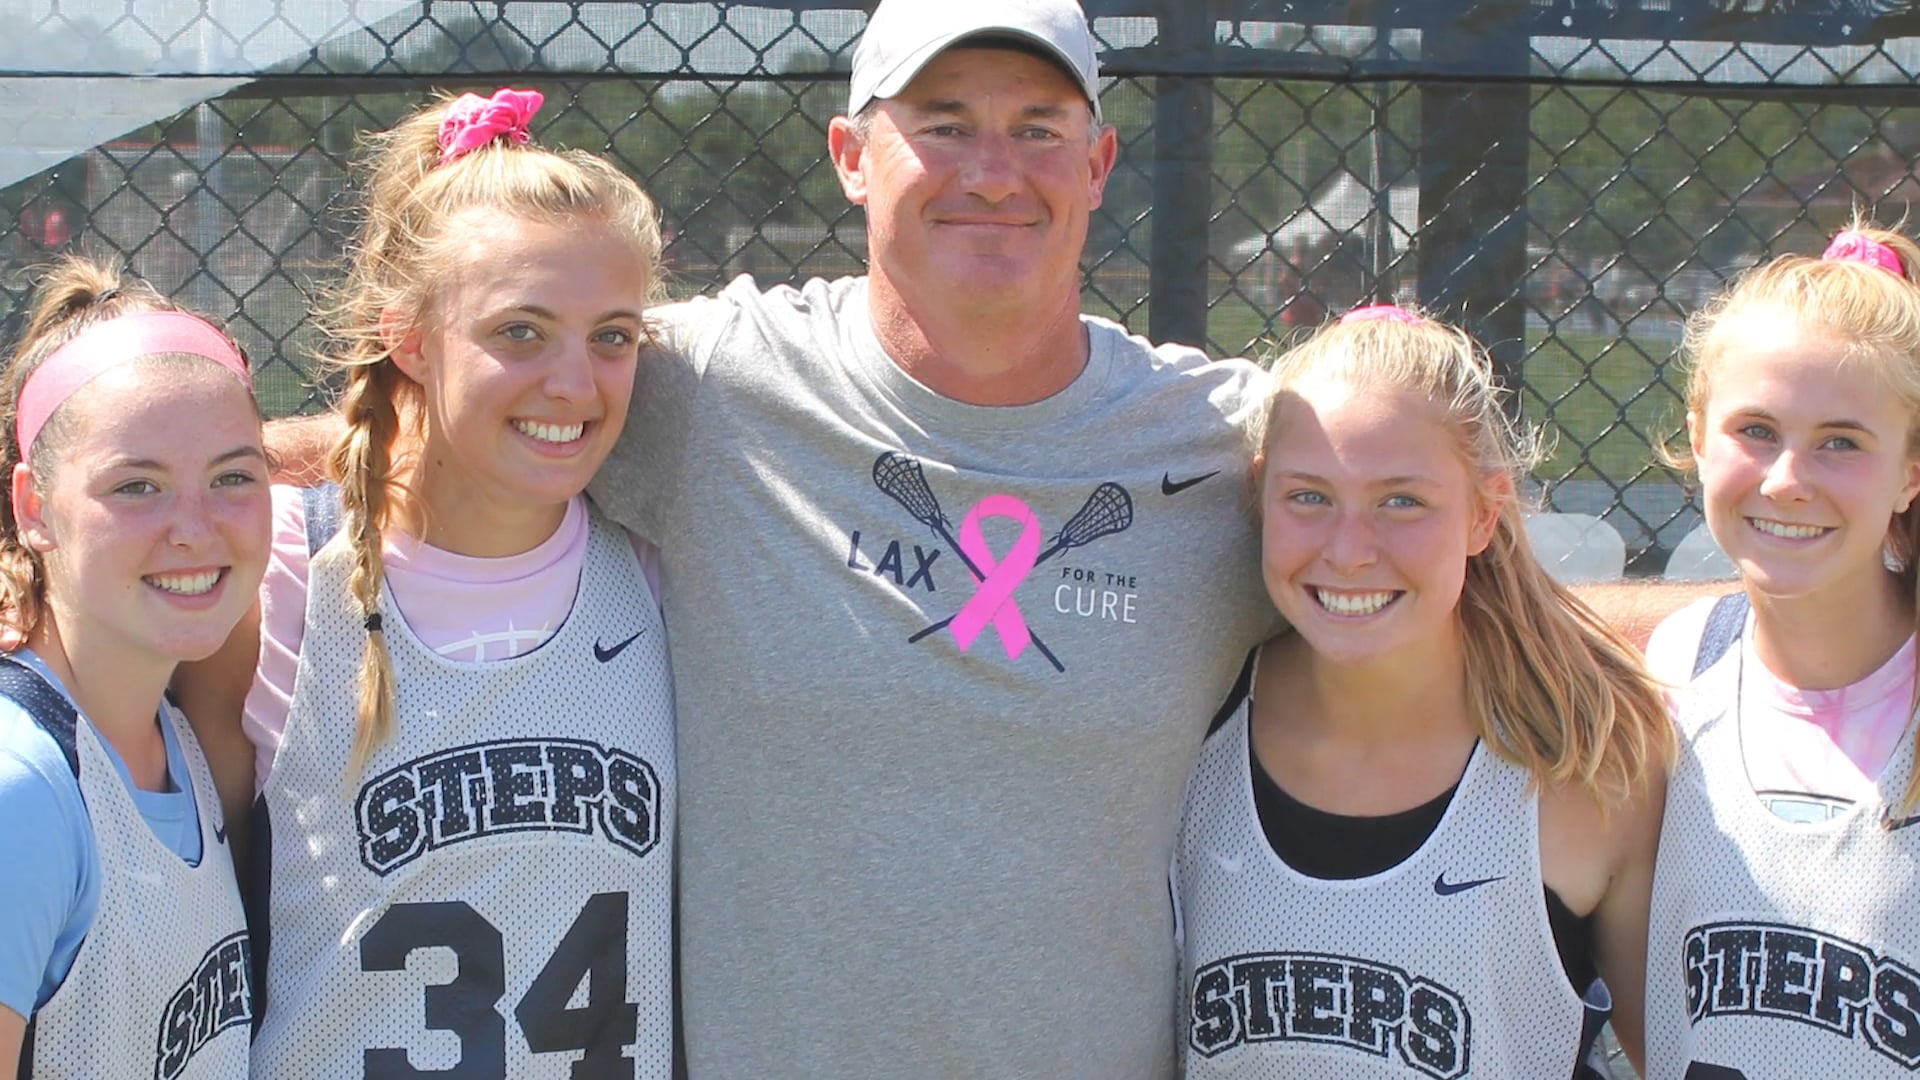 LAX for the Cure